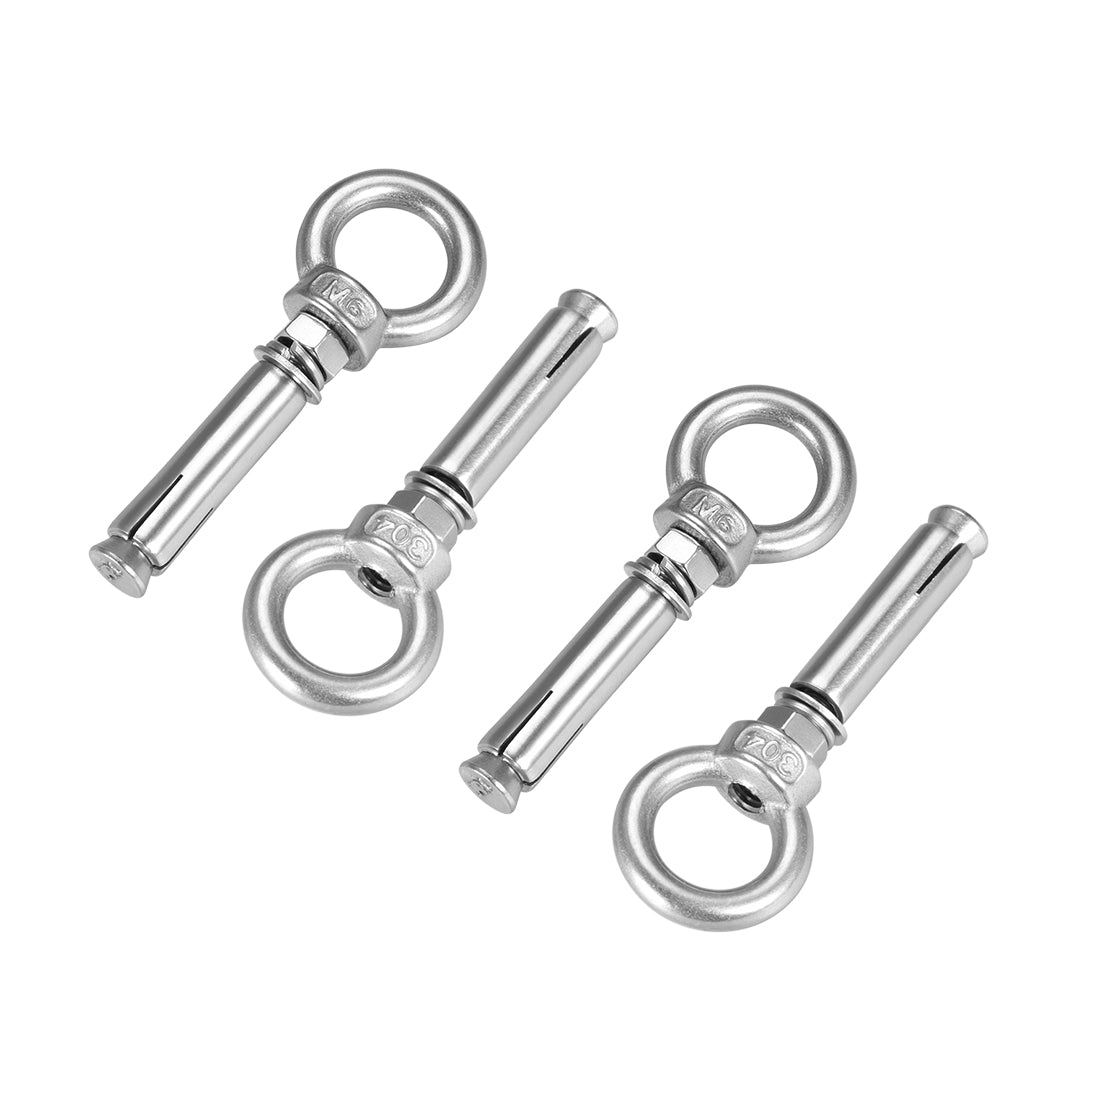 uxcell Uxcell M6 x 50 Expansion Eyebolt Eye Nut Screw with Ring Anchor Raw Bolts 4 Pcs